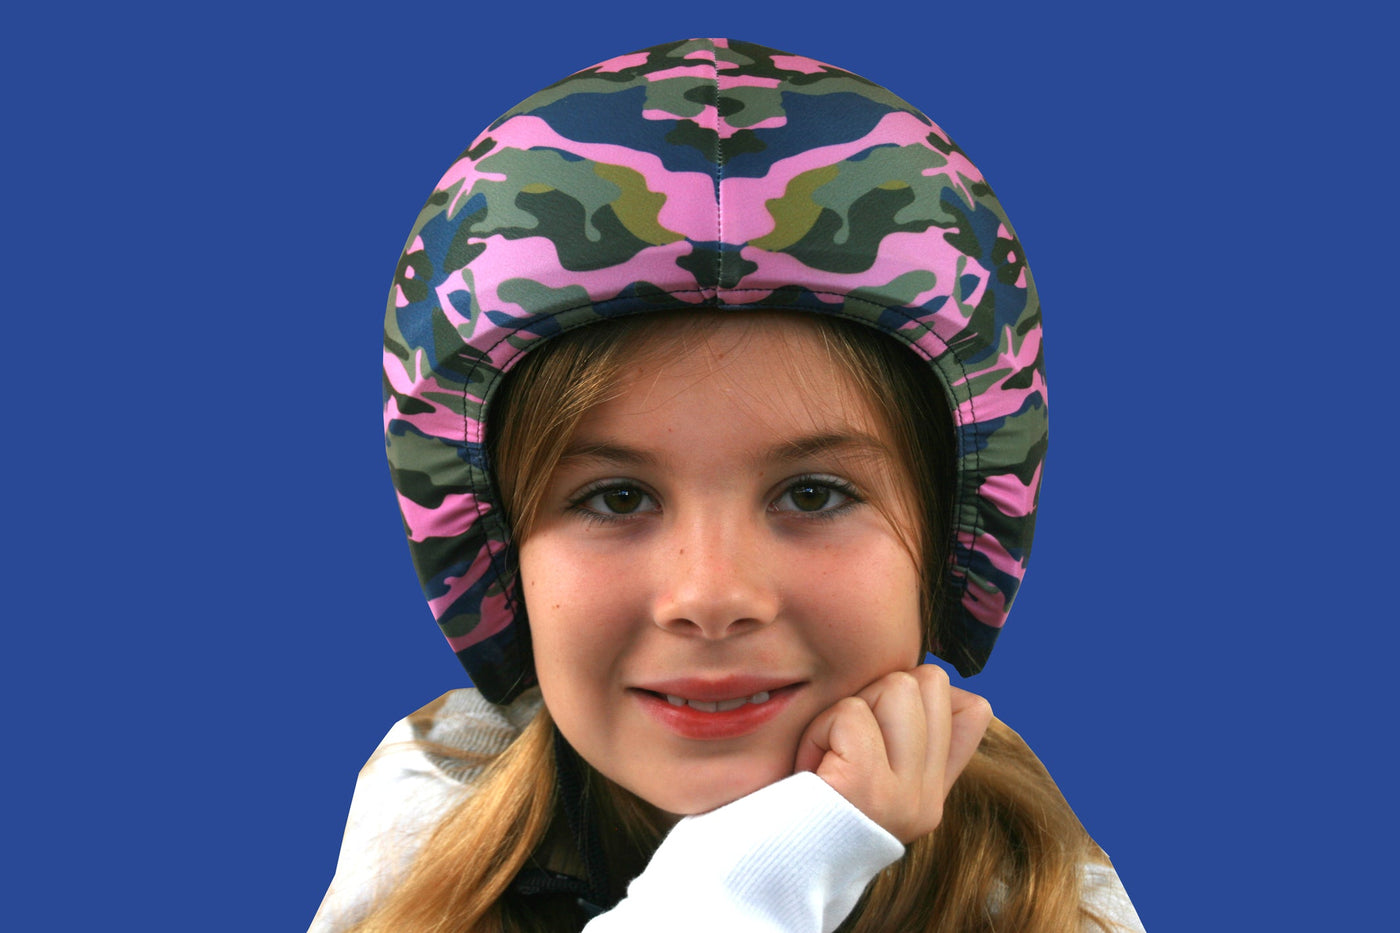 Coolcasc Printed Cool Helmet Cover Camouflage